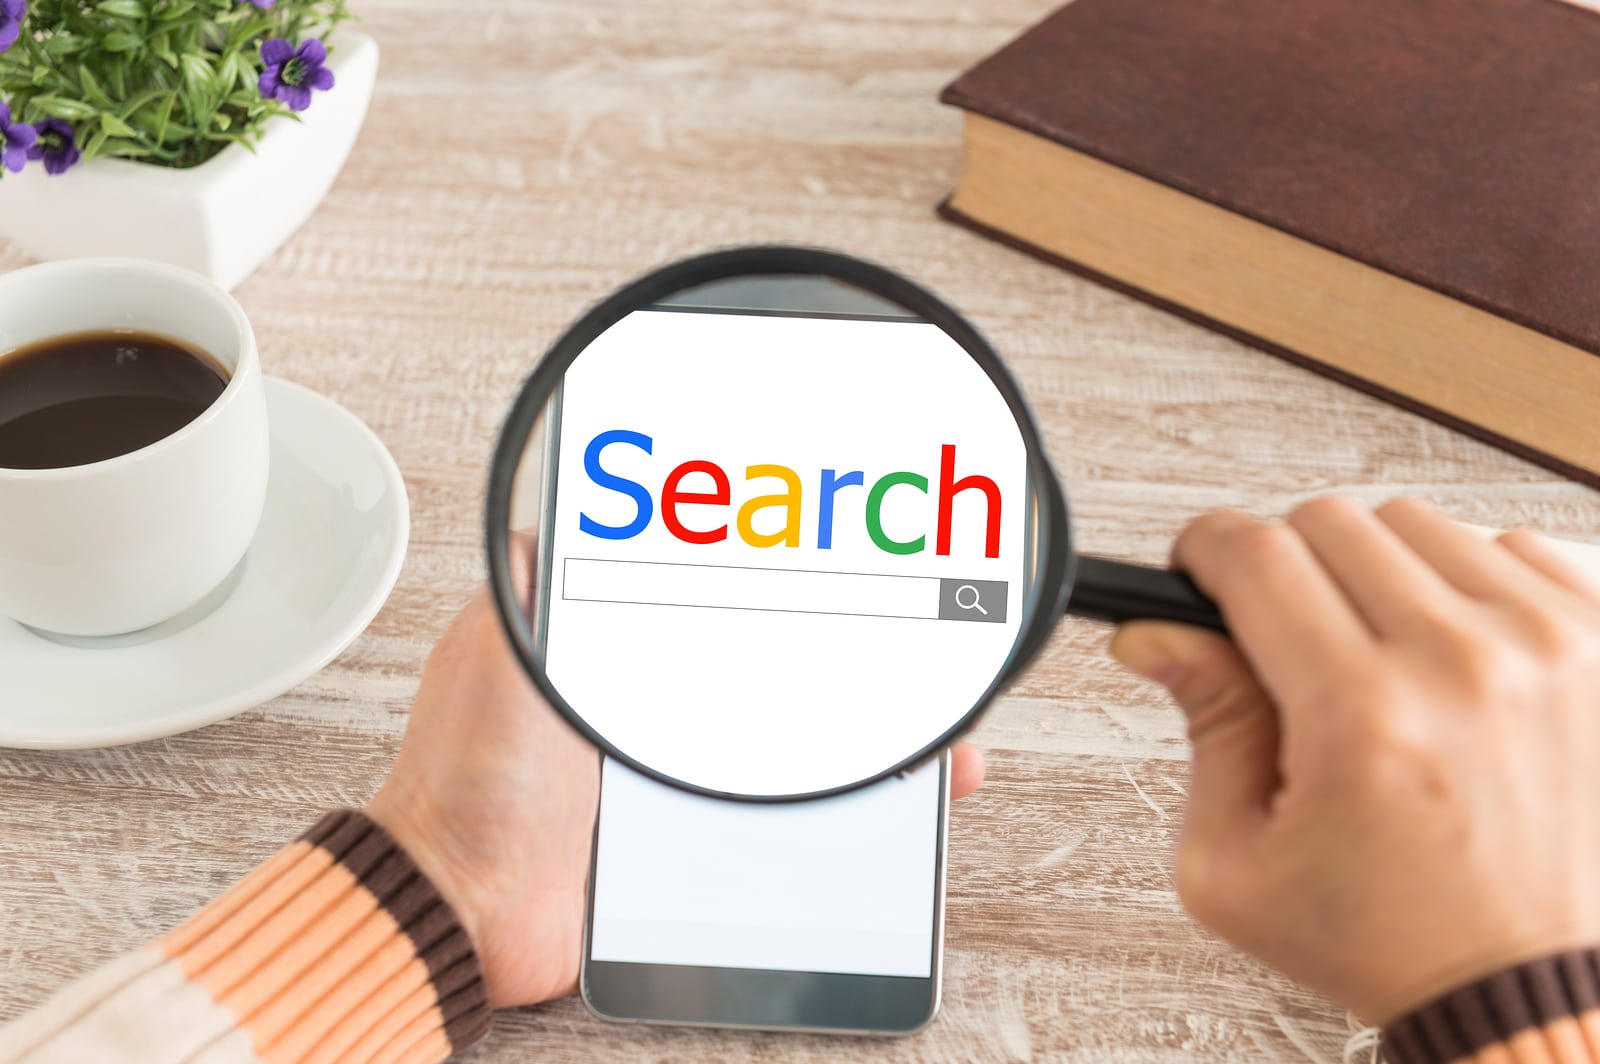 search engine concept image with phone and magnifying glass